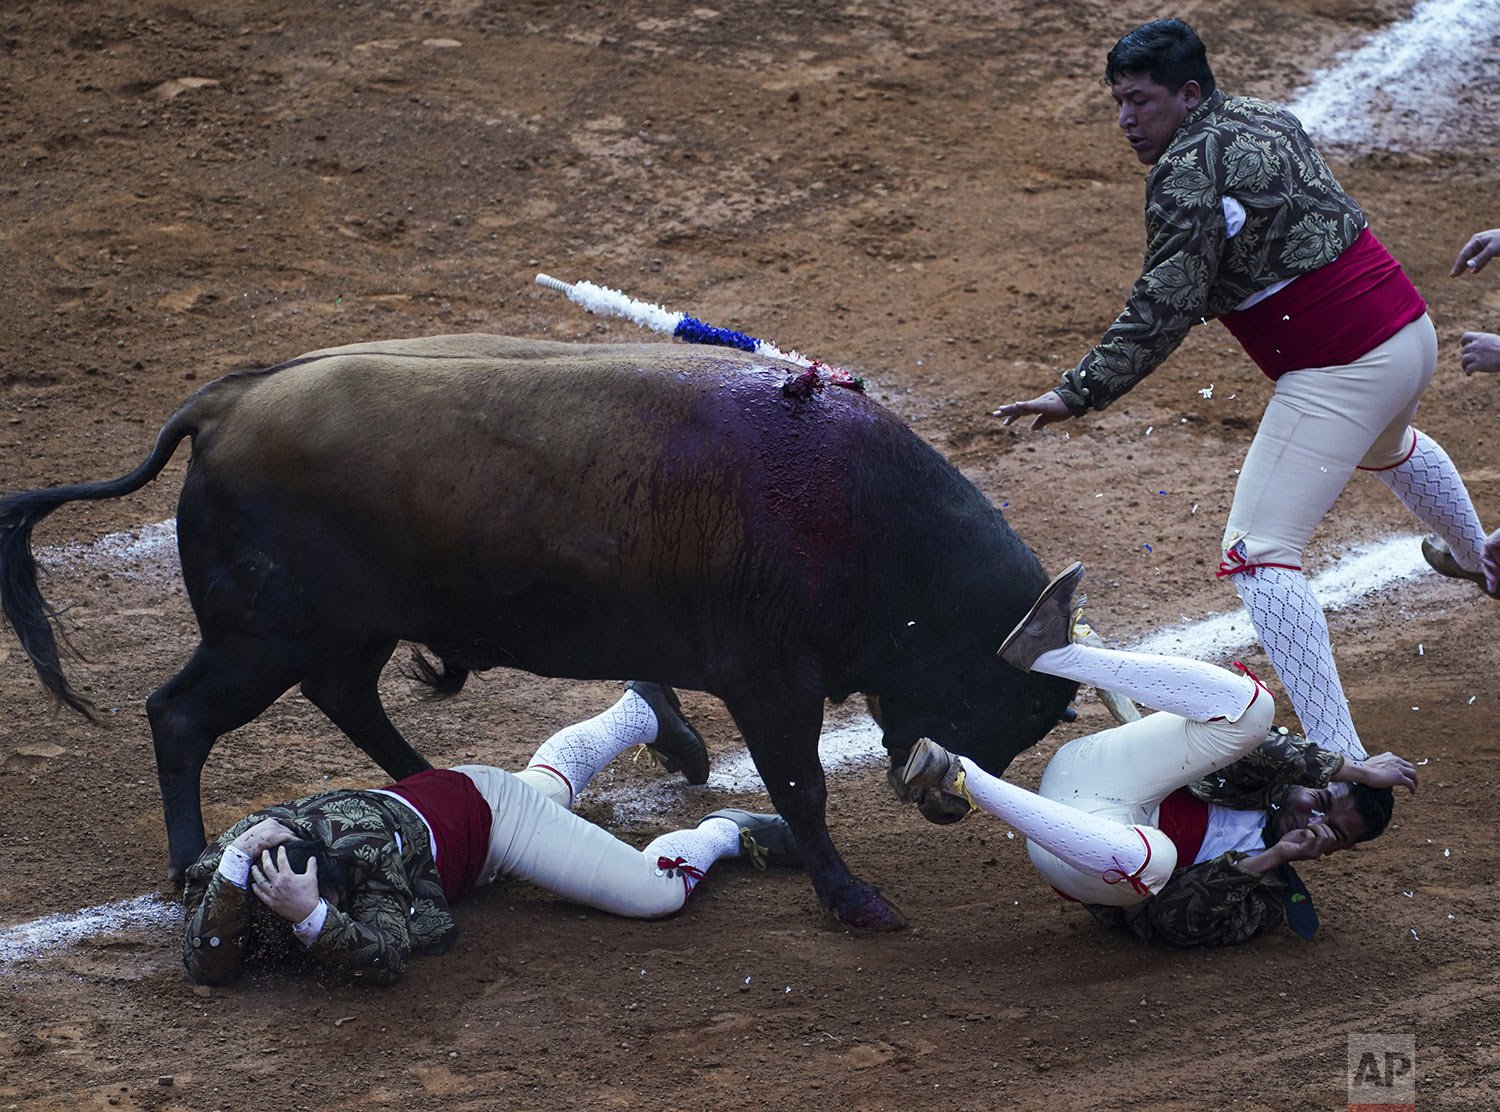  Members of the “Forcados Amadores de Mexico" are toppled by a bull during a bullfight at La Plaza de Toros Mexico in Mexico City, Feb. 20, 2022. This season's bullfights may be the last, as legislators in the capital seek to revive a bill banning it